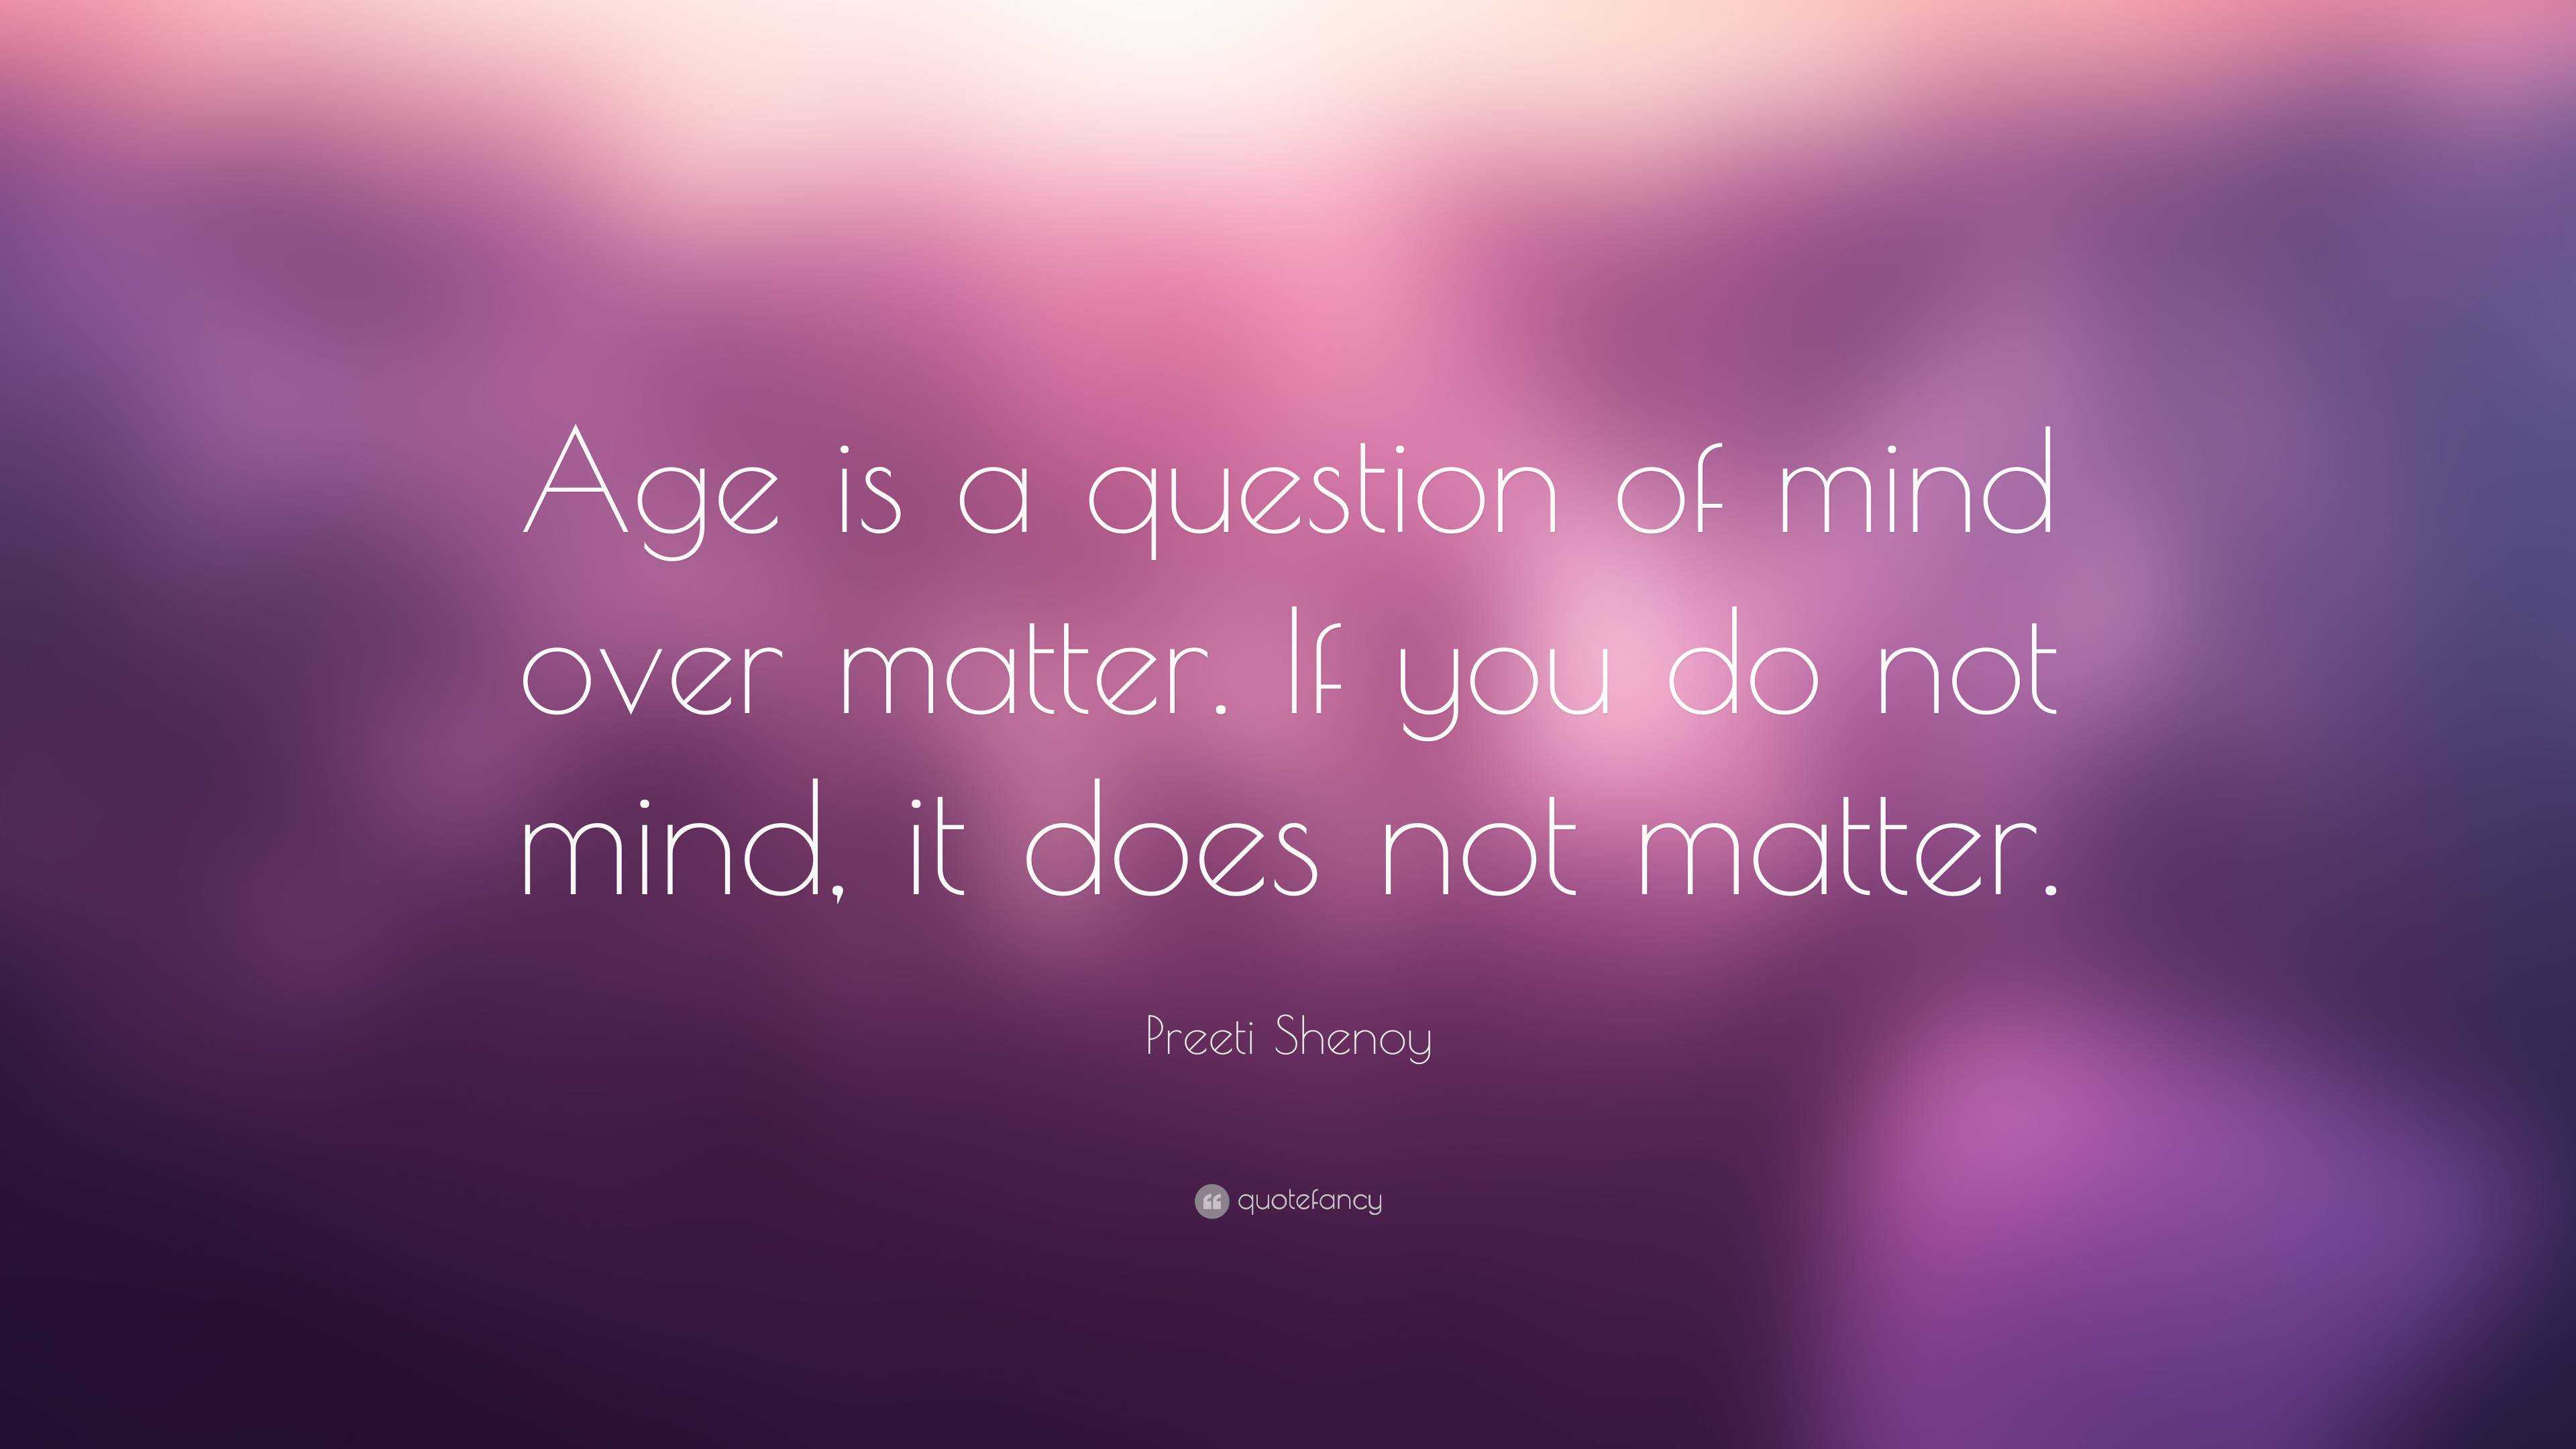 Preeti Shenoy Quote: “Age is a question of mind over matter. If you do ...